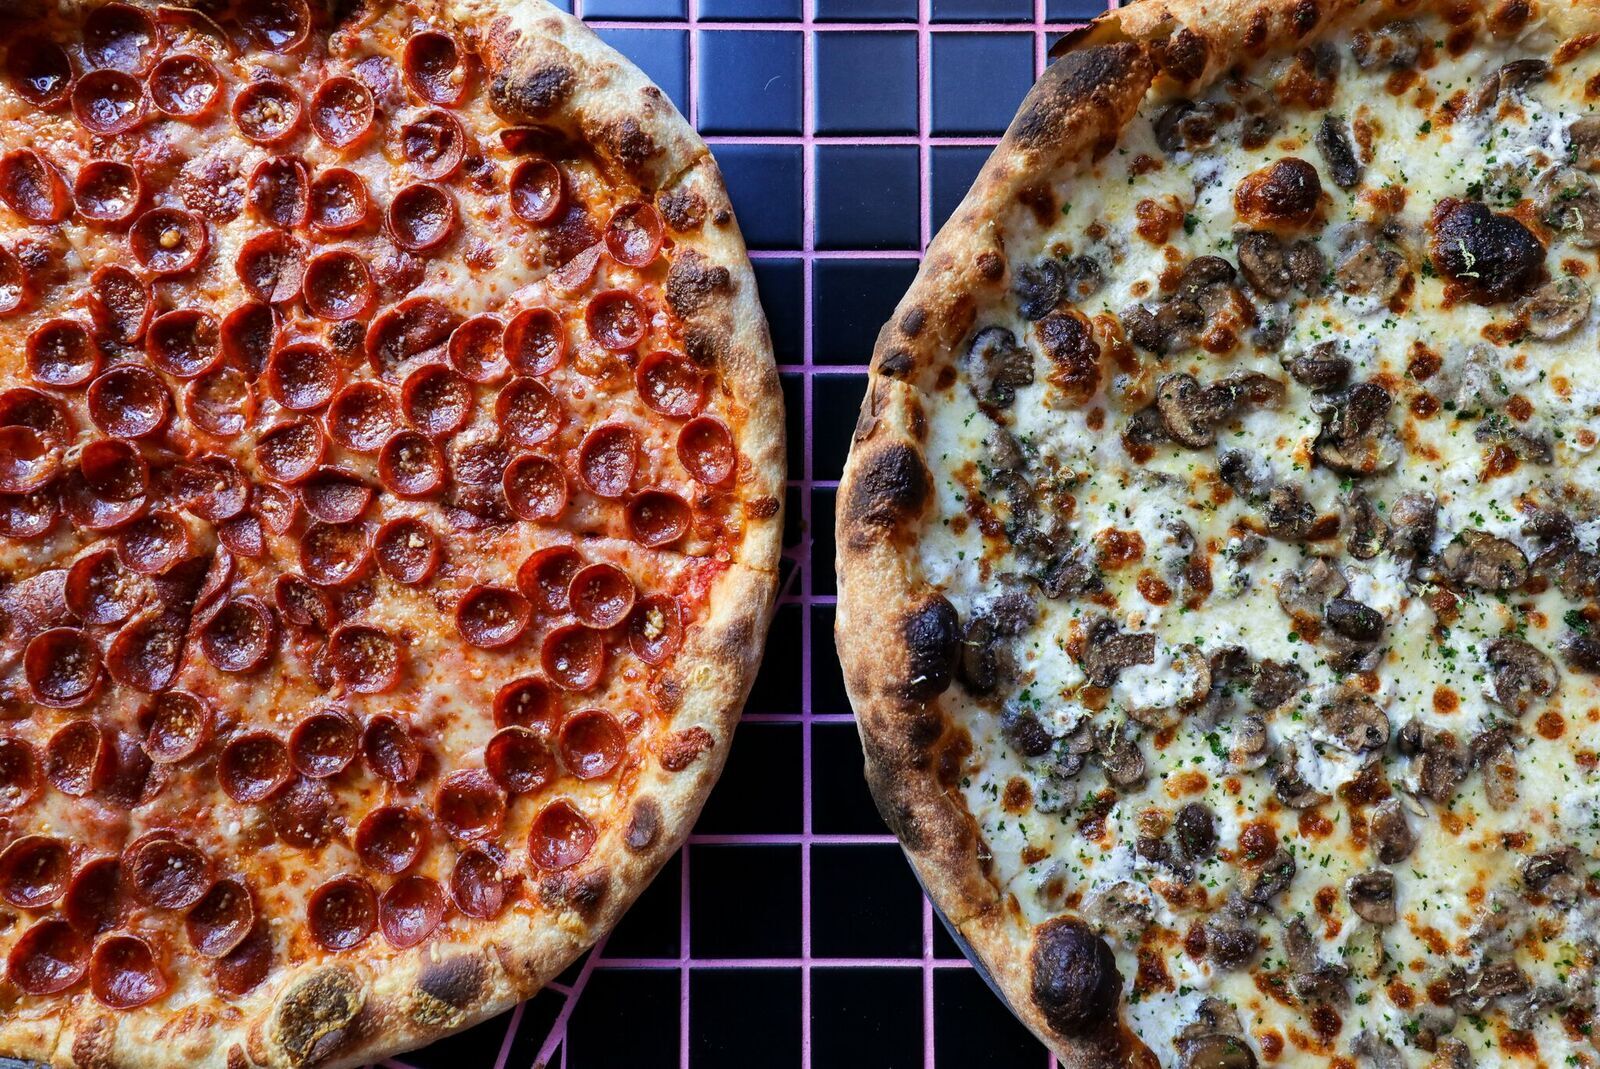 Upside Pizza and its scoop-parlor sister to open in Morningside Heights